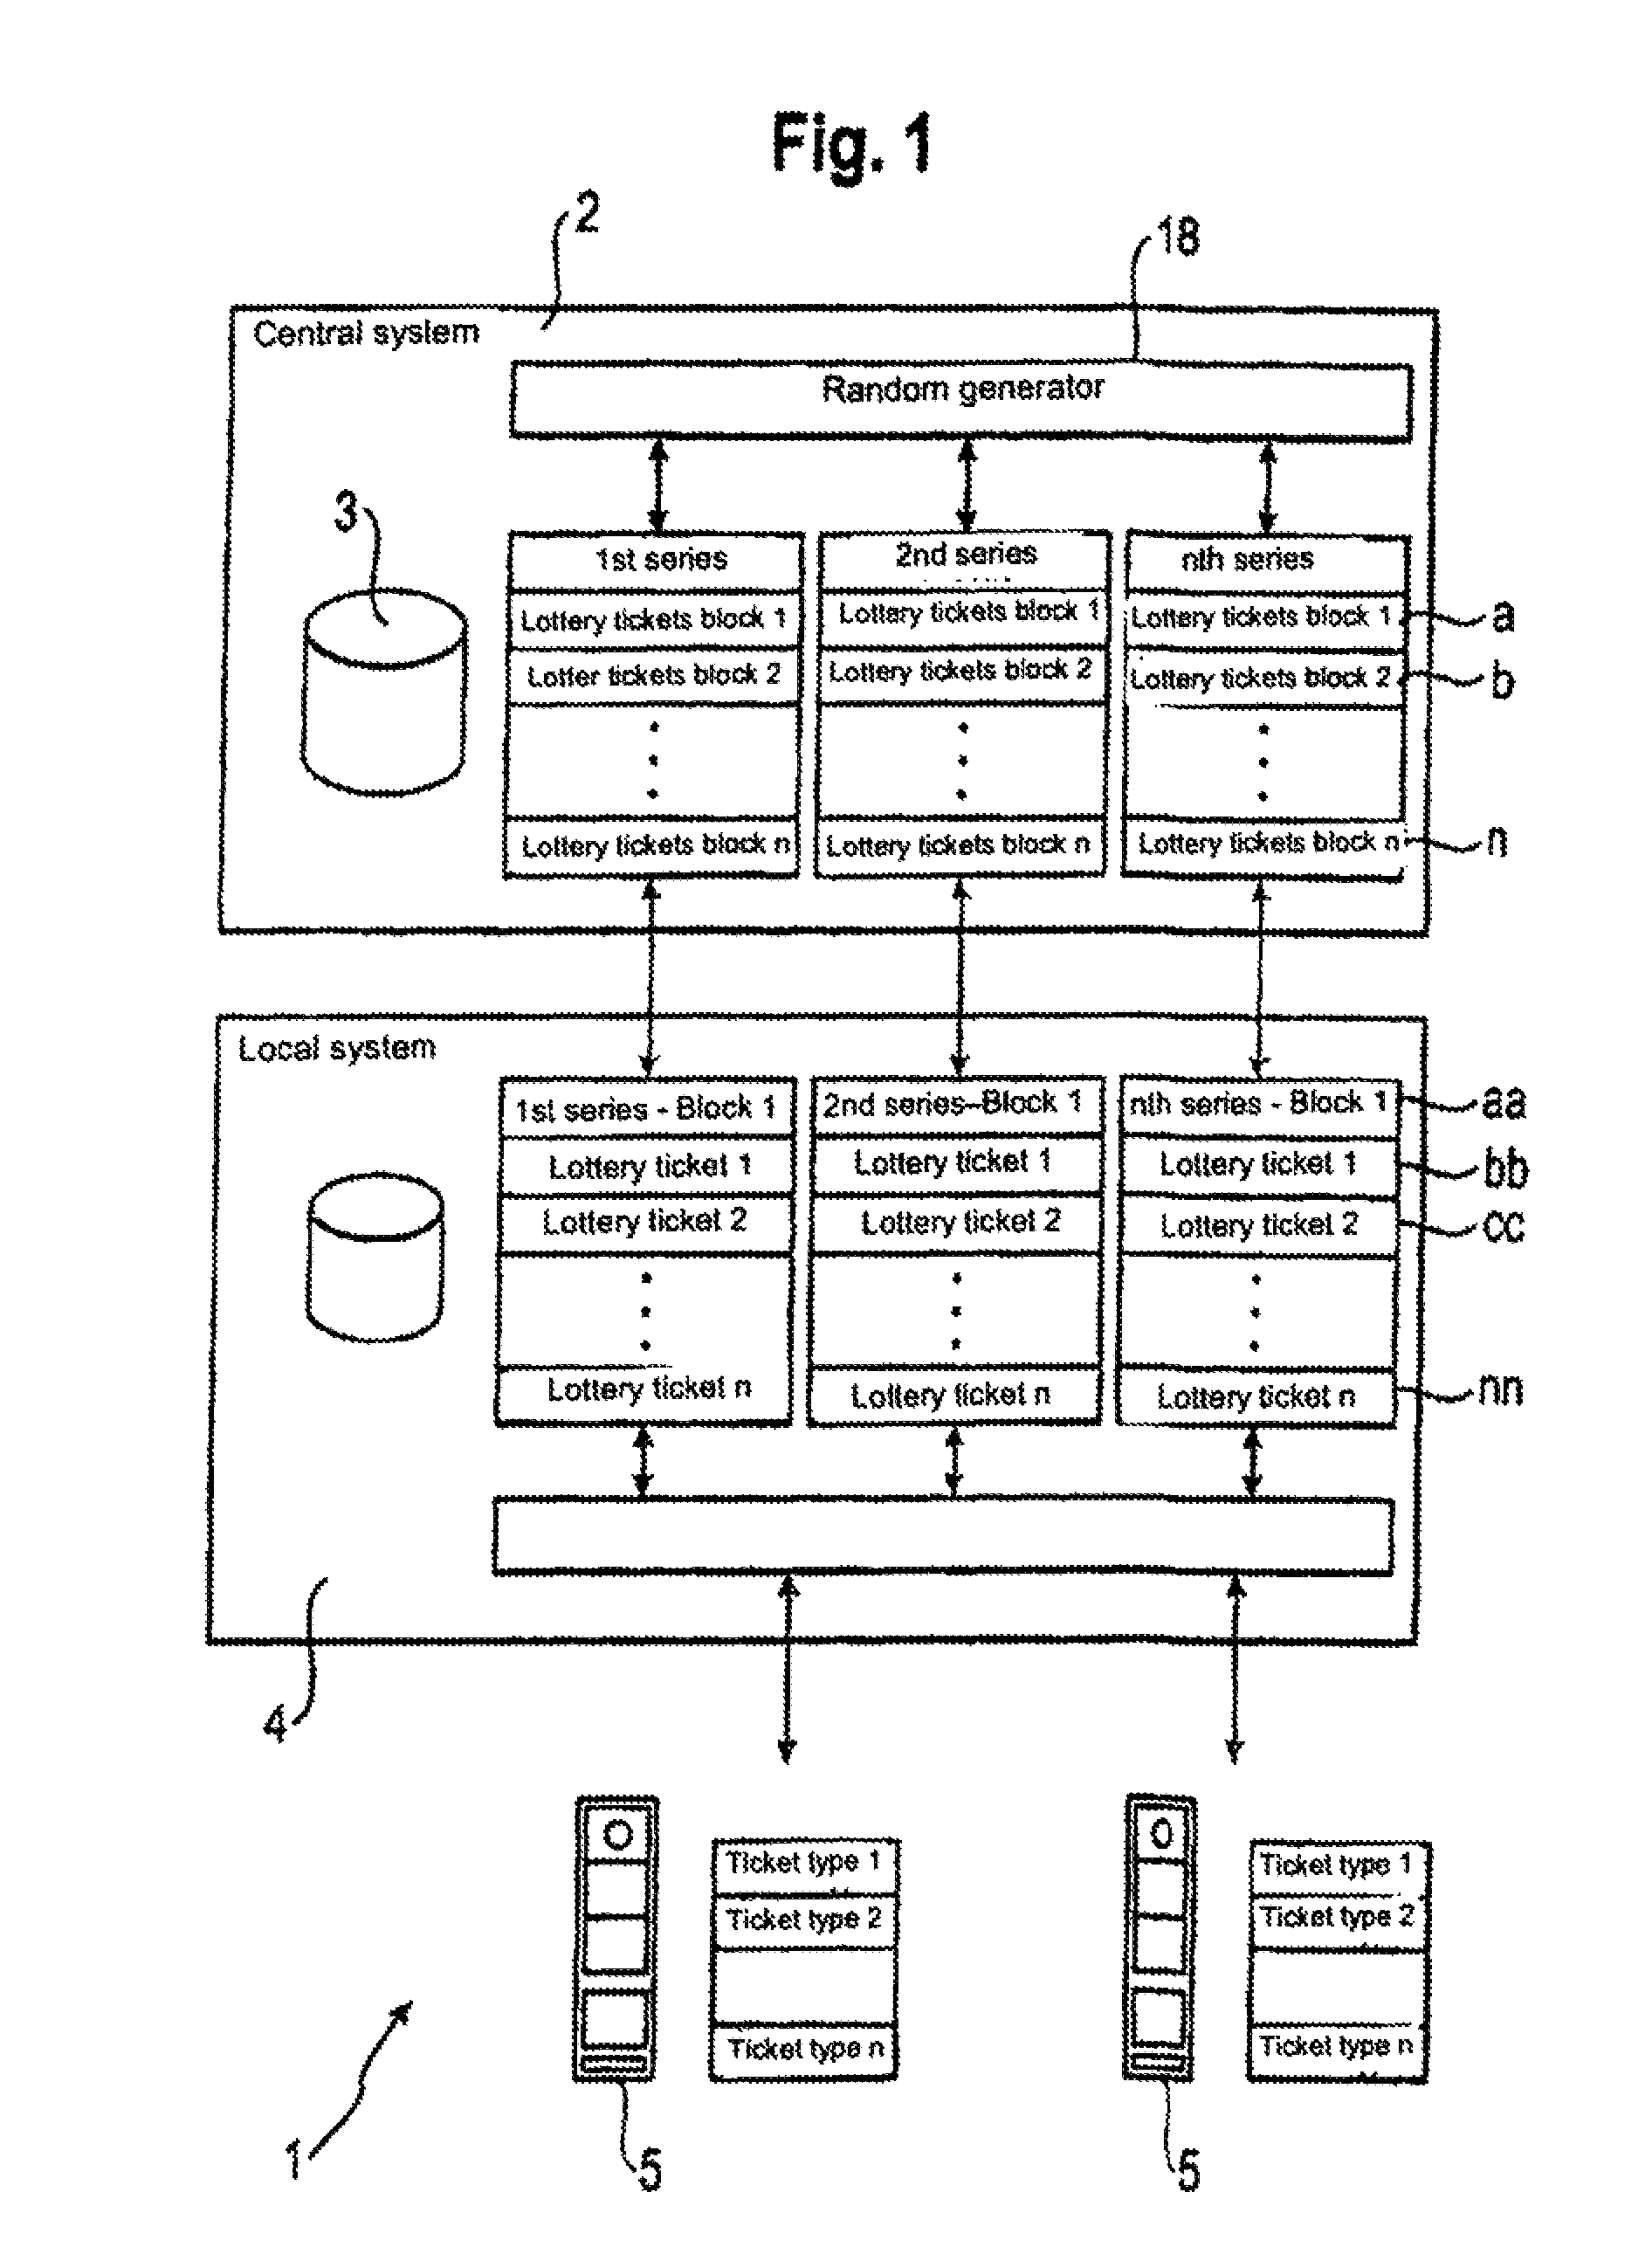 Electronic gaming device